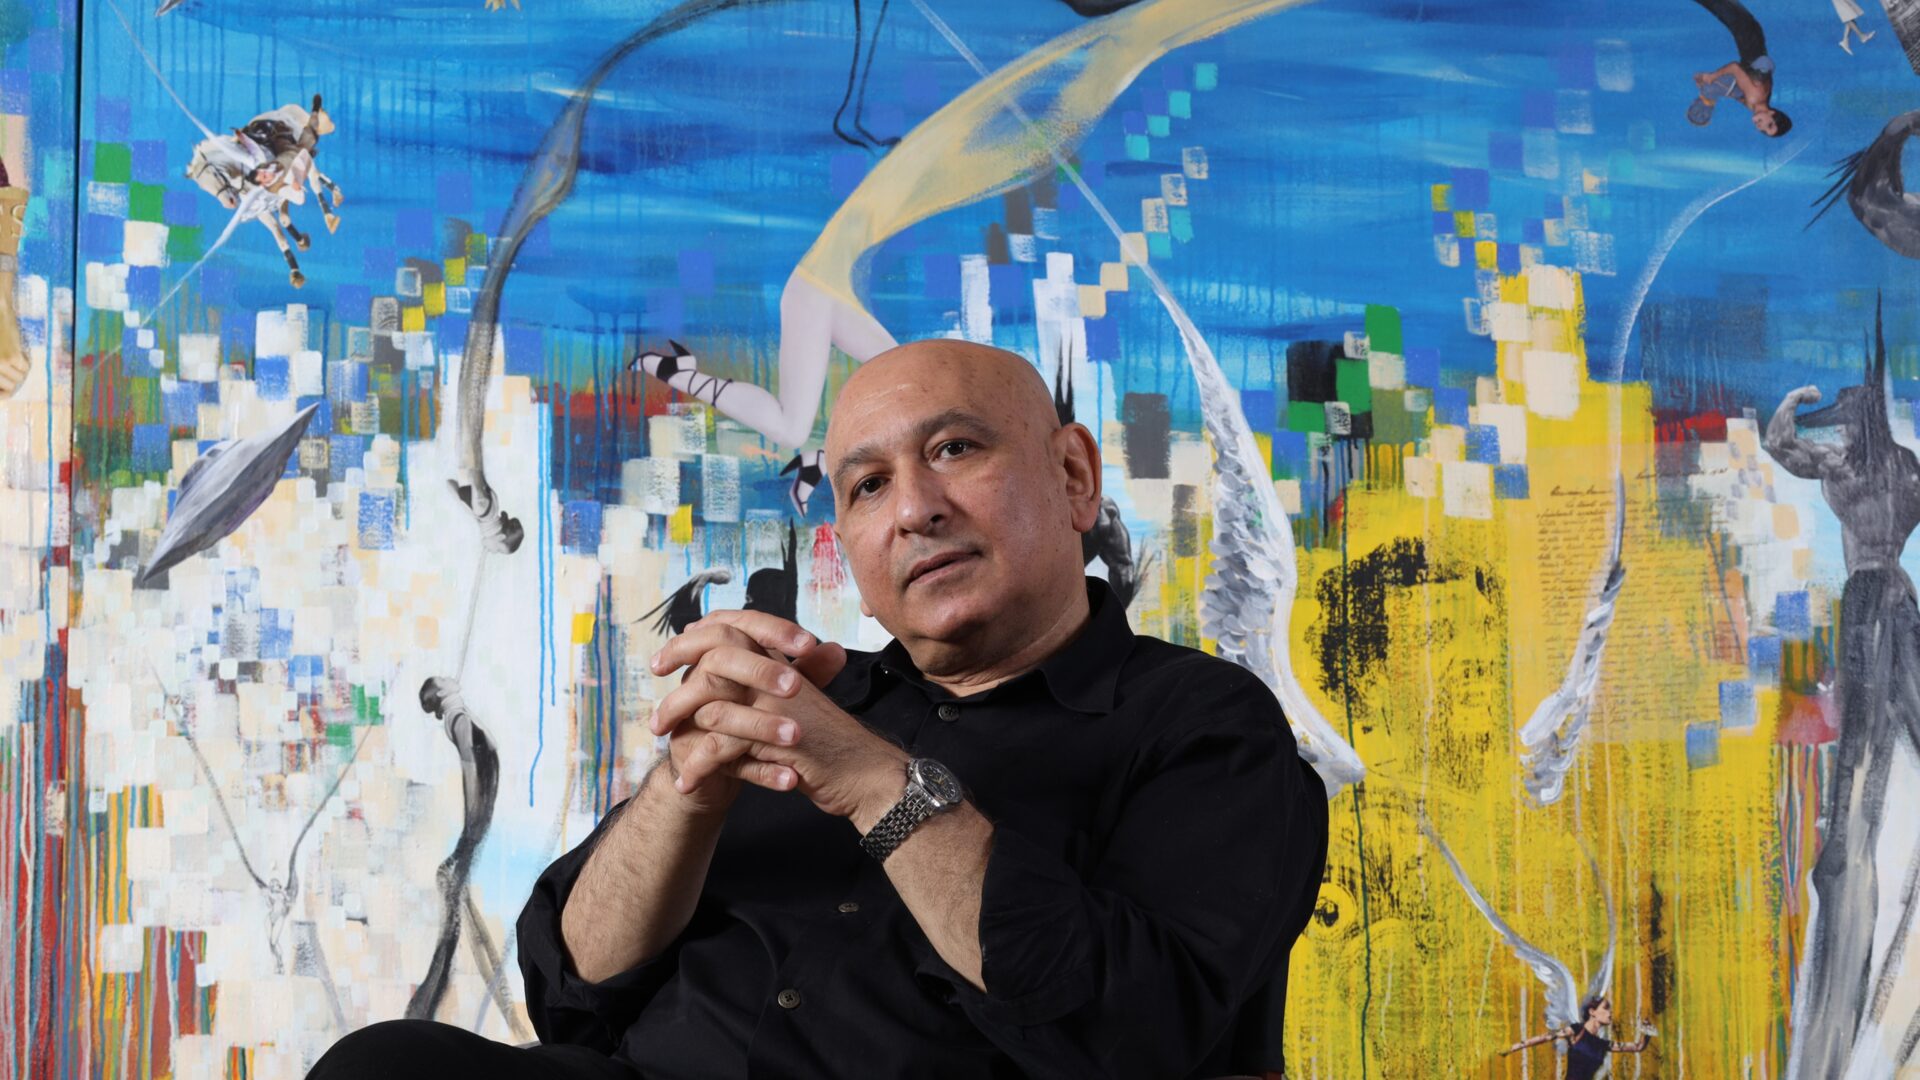 Artist headshot of a person with their hands clasped together in front of a colourful artwork